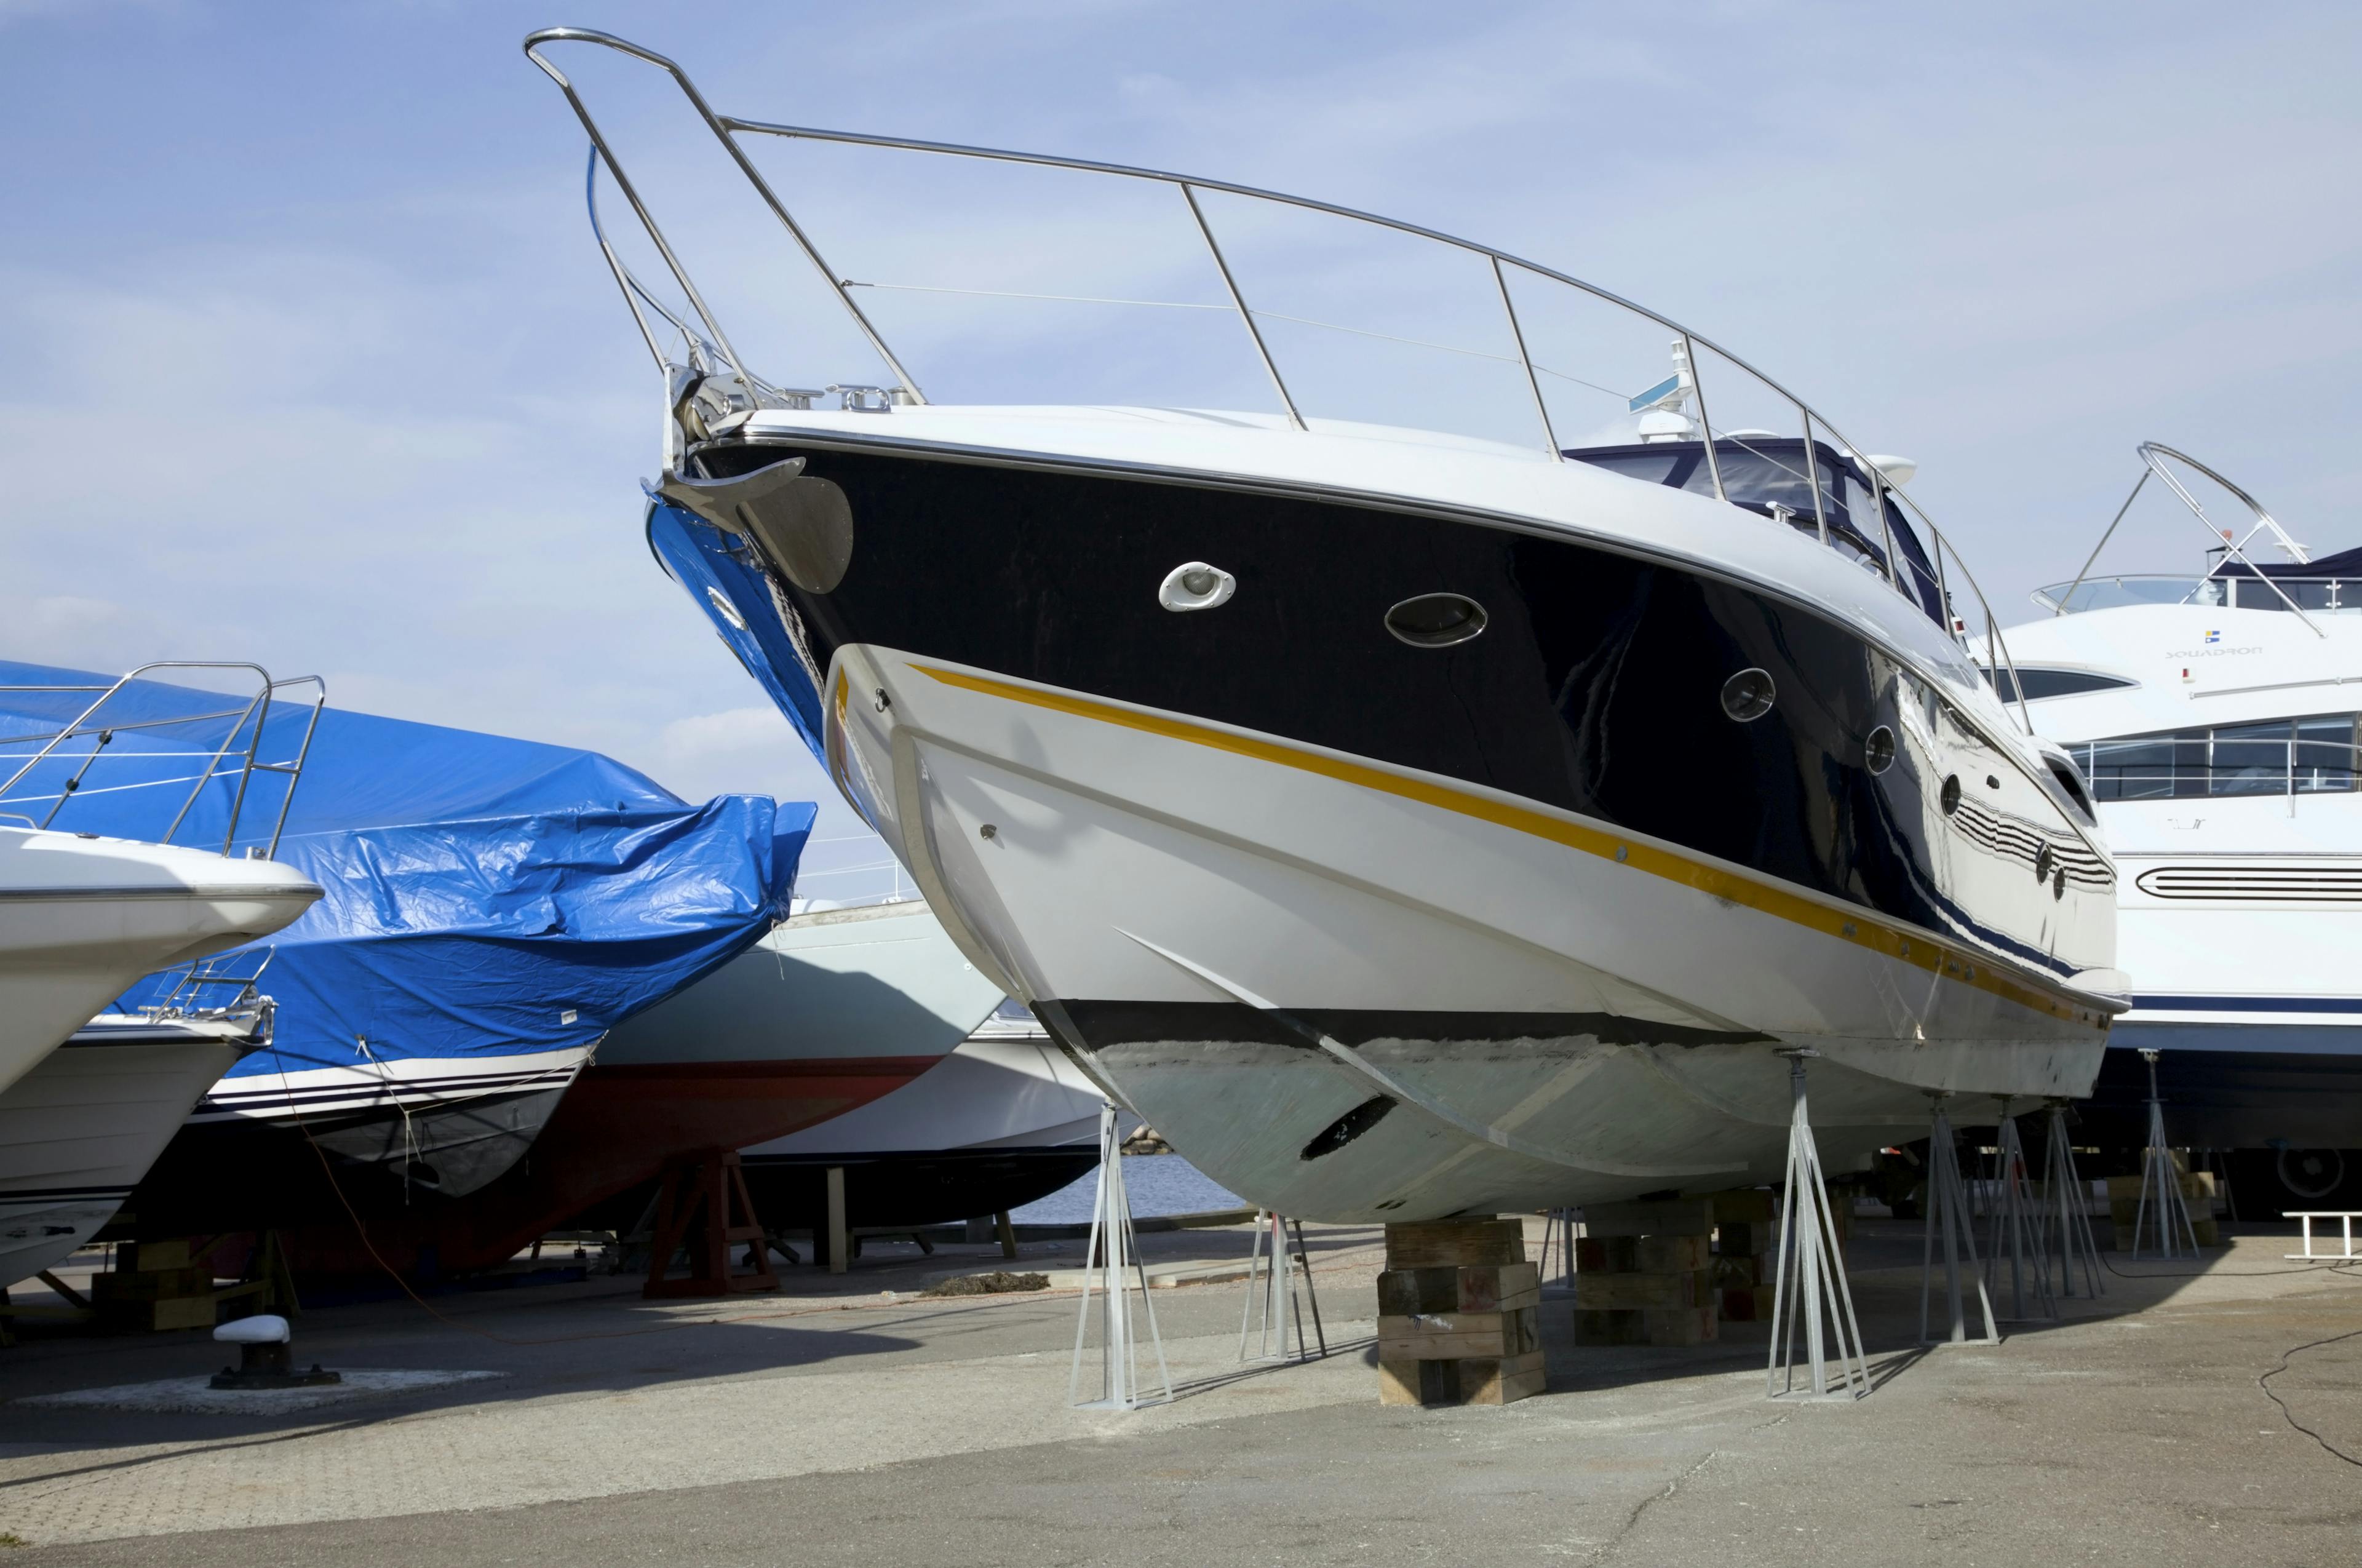 Easily find boat storage today on Boaters List.